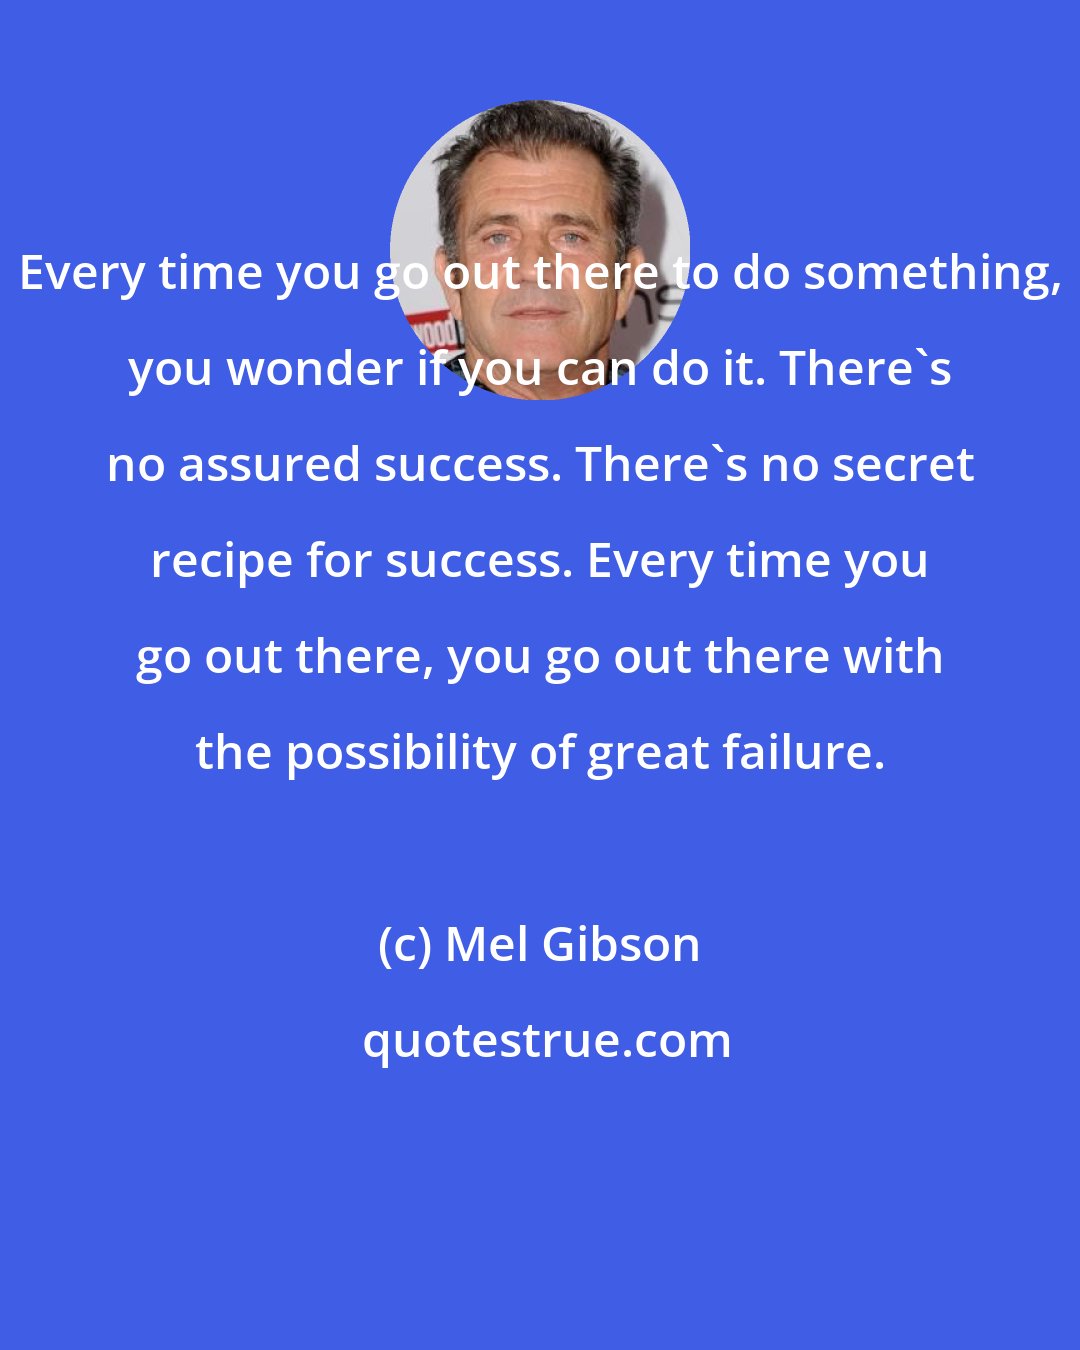 Mel Gibson: Every time you go out there to do something, you wonder if you can do it. There's no assured success. There's no secret recipe for success. Every time you go out there, you go out there with the possibility of great failure.